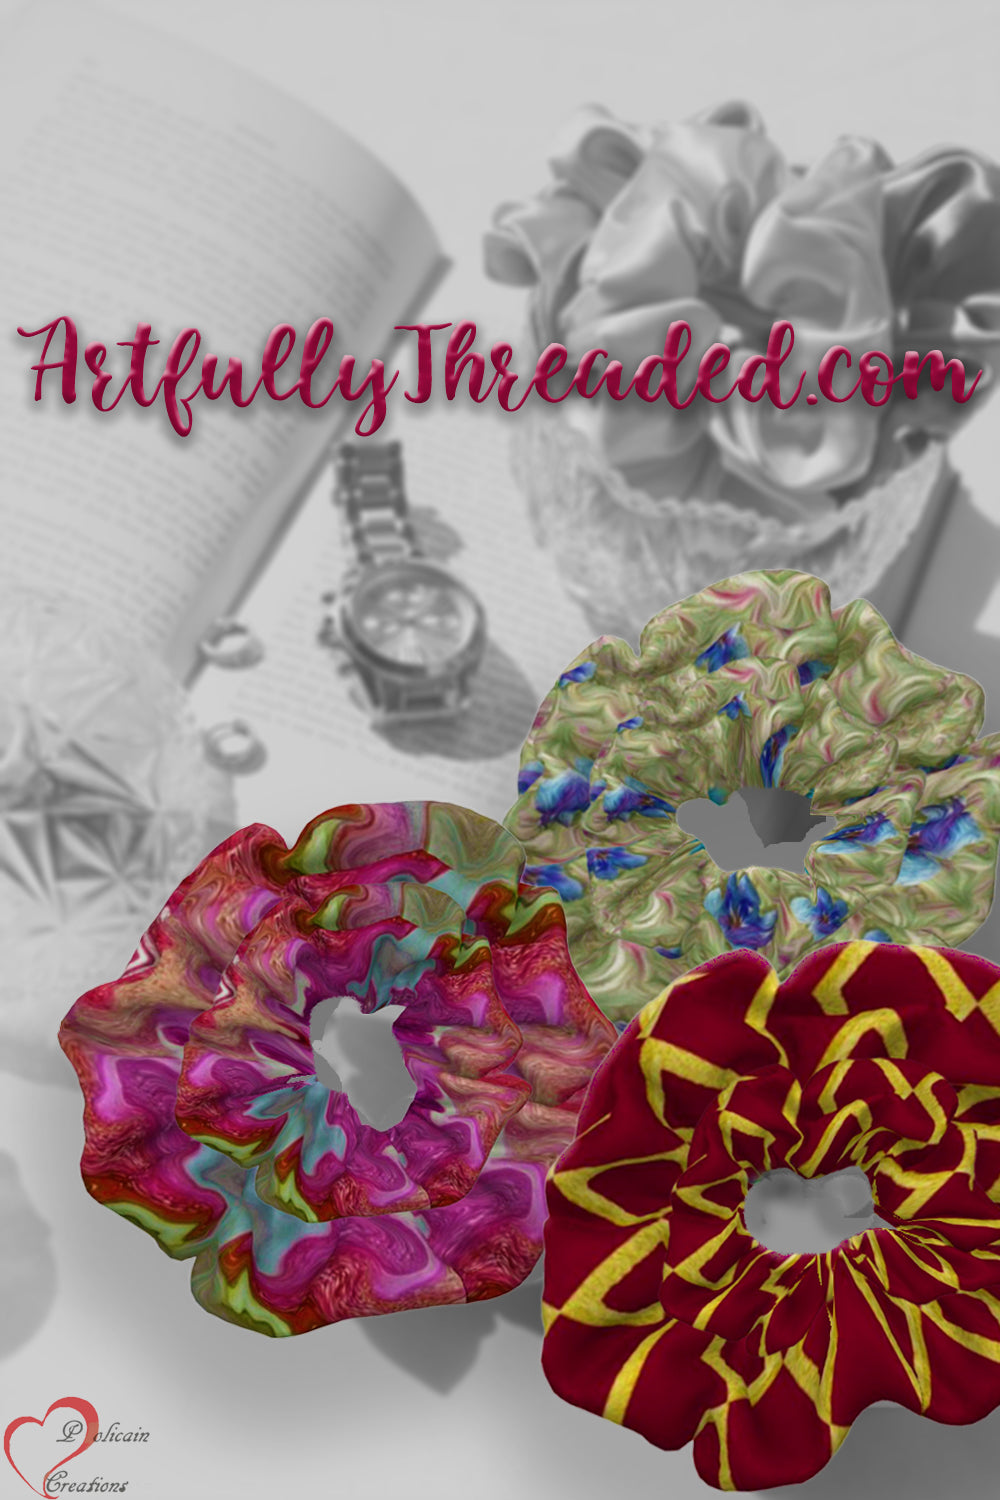 3 Pack of Hair Scrunchies - Floral, Fluid and Gold on Red